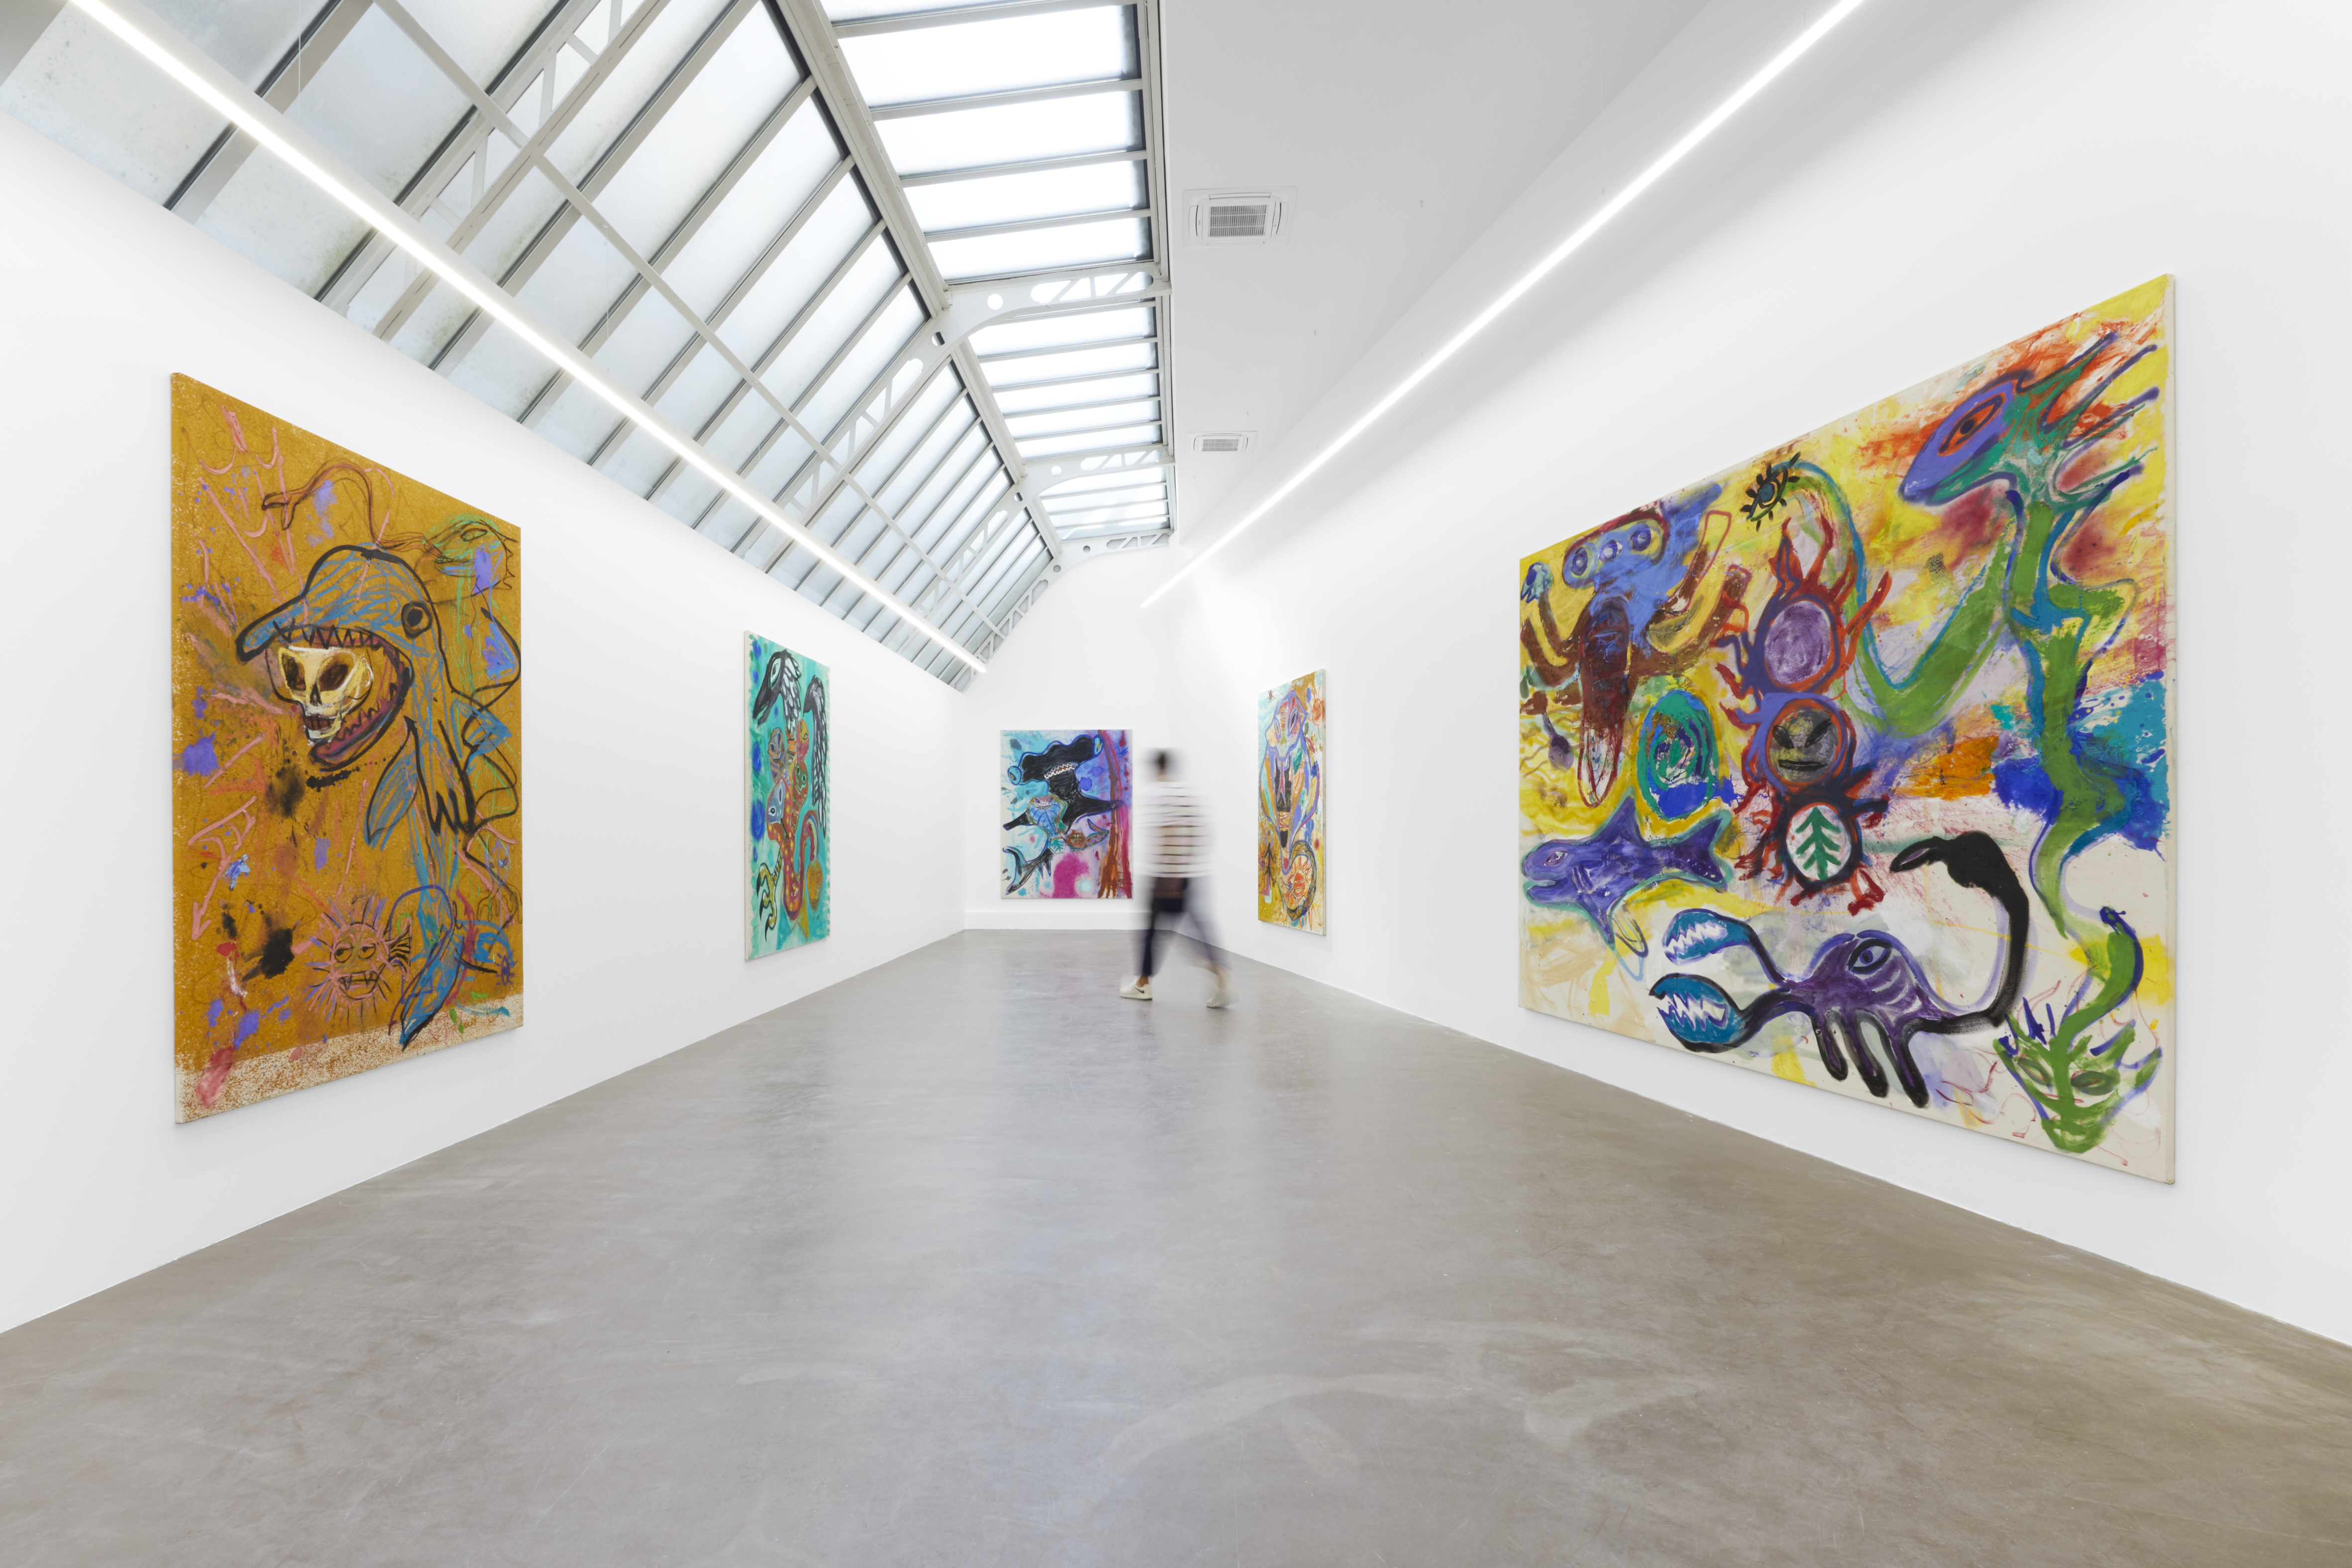 Installation view, Bill Saylor: The Freaks Are Stealing Our Sunshine, Galerie Julien Cadet, Paris, FR 2022. Image courtesy of the artist and Galerie Julien Cadet.